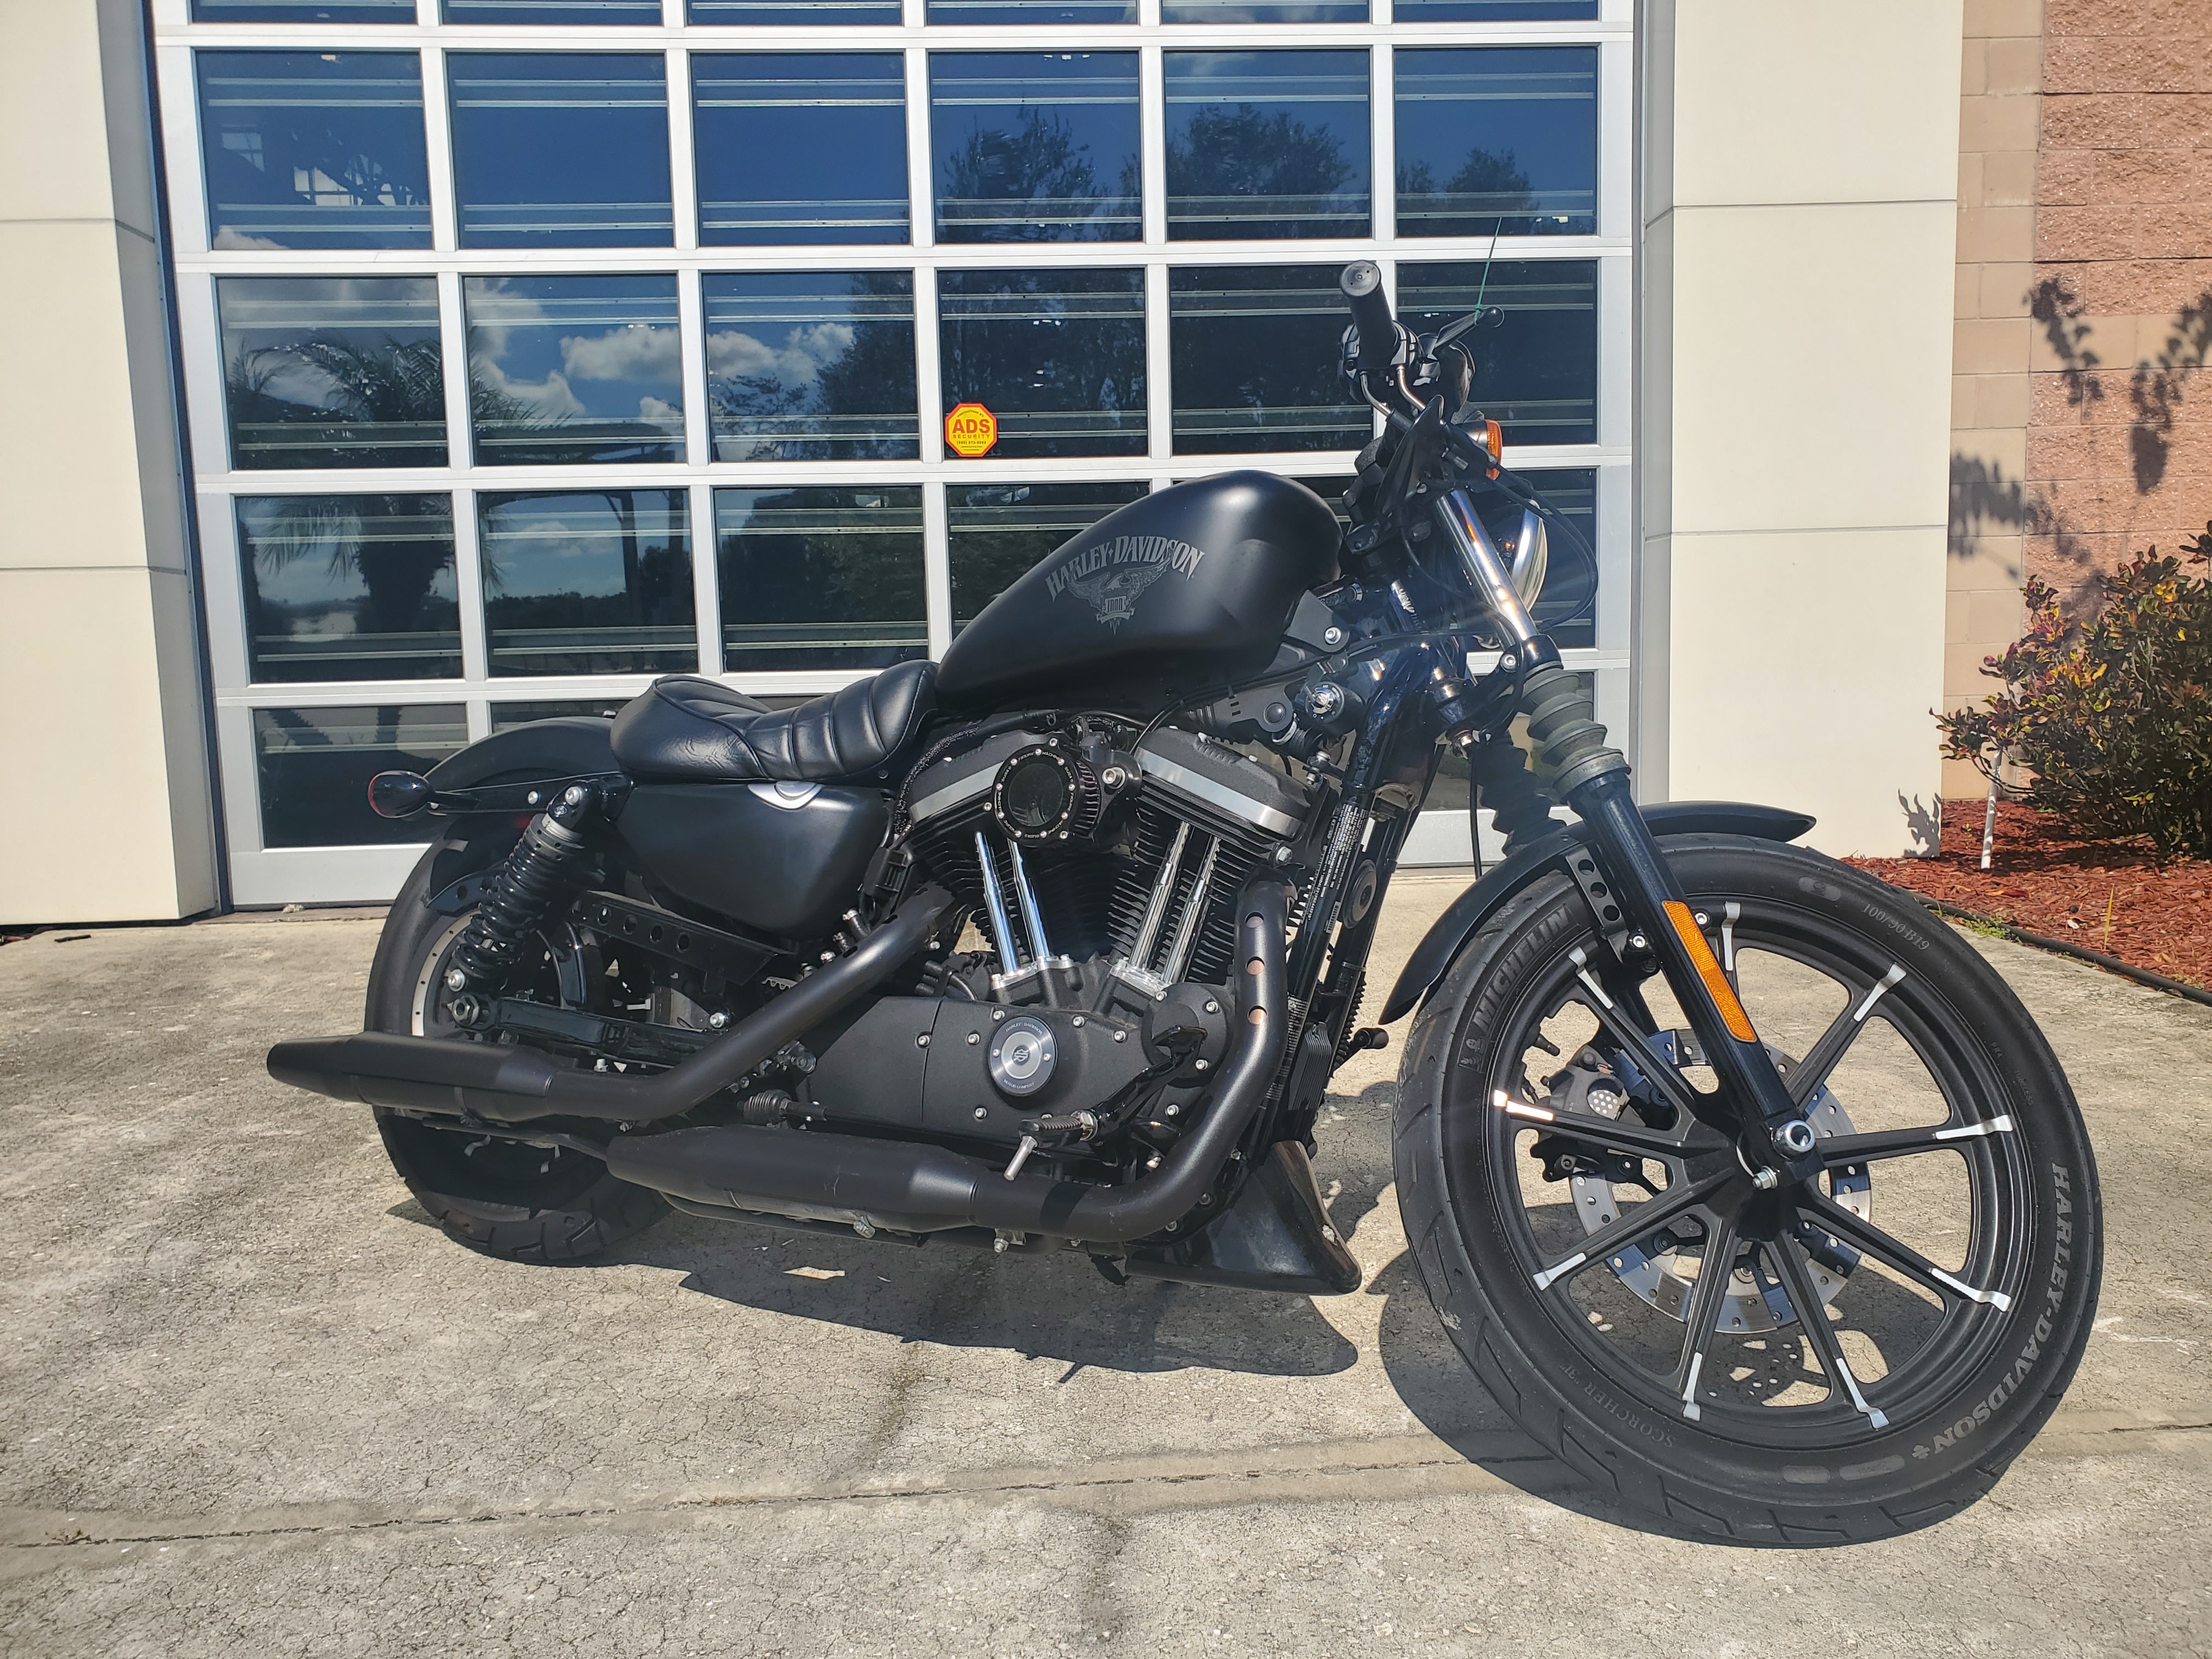 Pre-Owned 2016 Harley-Davidson Iron 883 in Palm Bay #443219 | Space ...